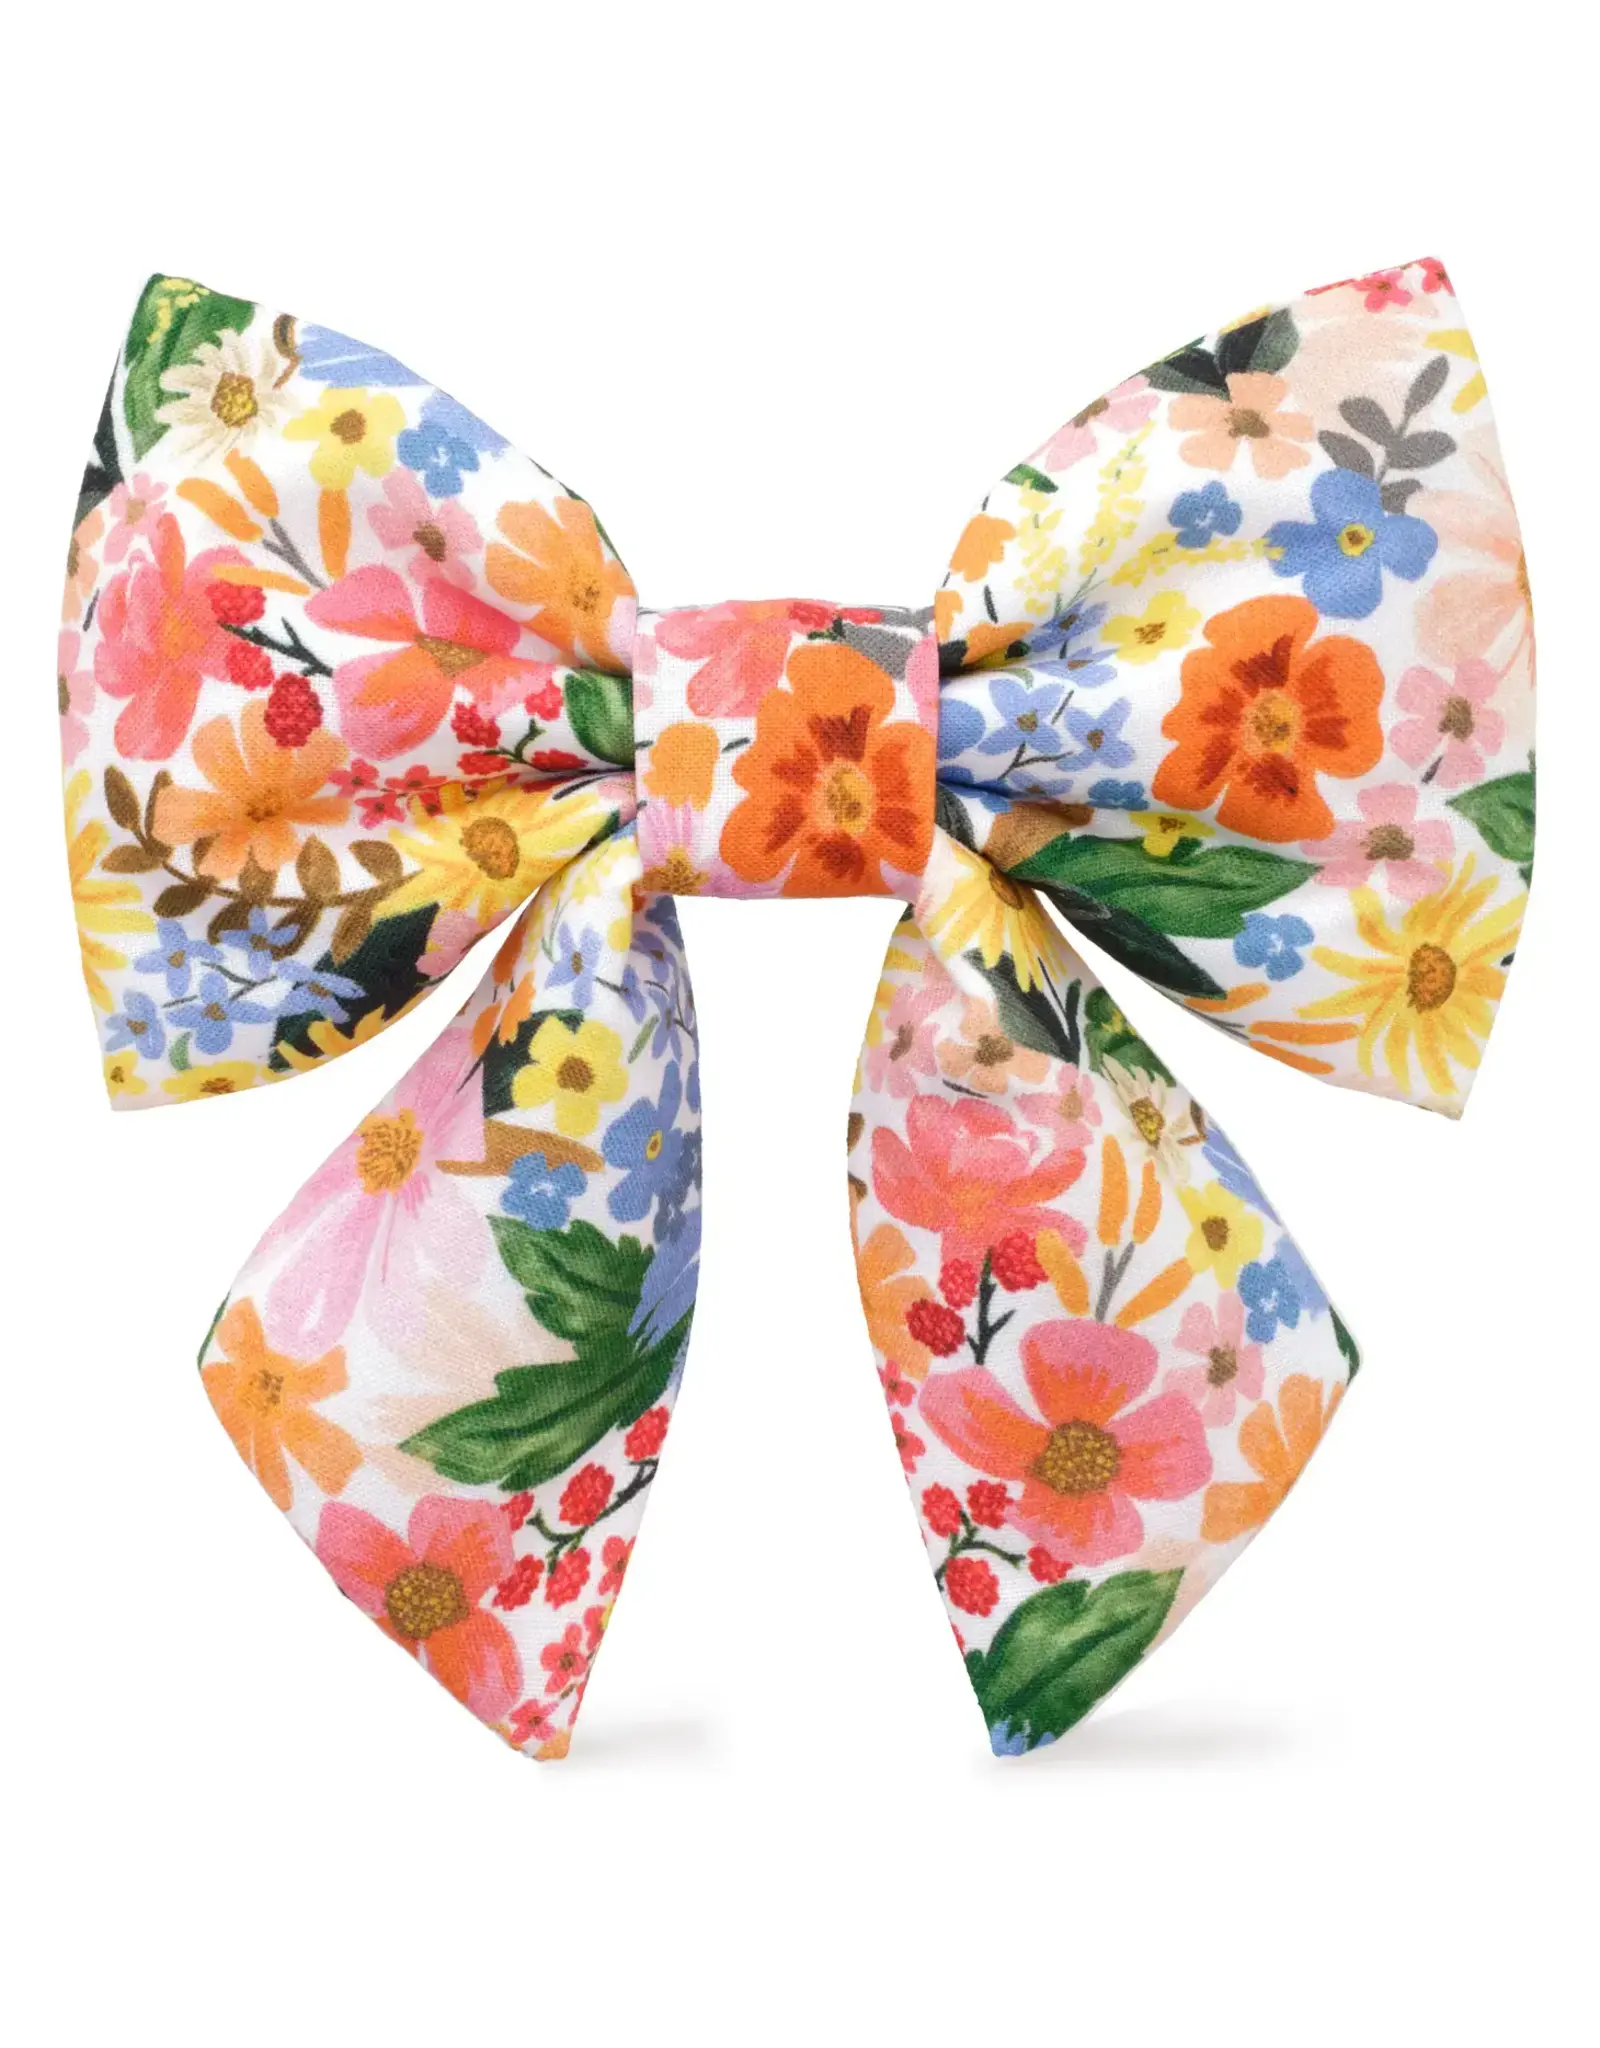 Rifle Paper Co. x TFD Garden Party Spring Lady Dog Bow